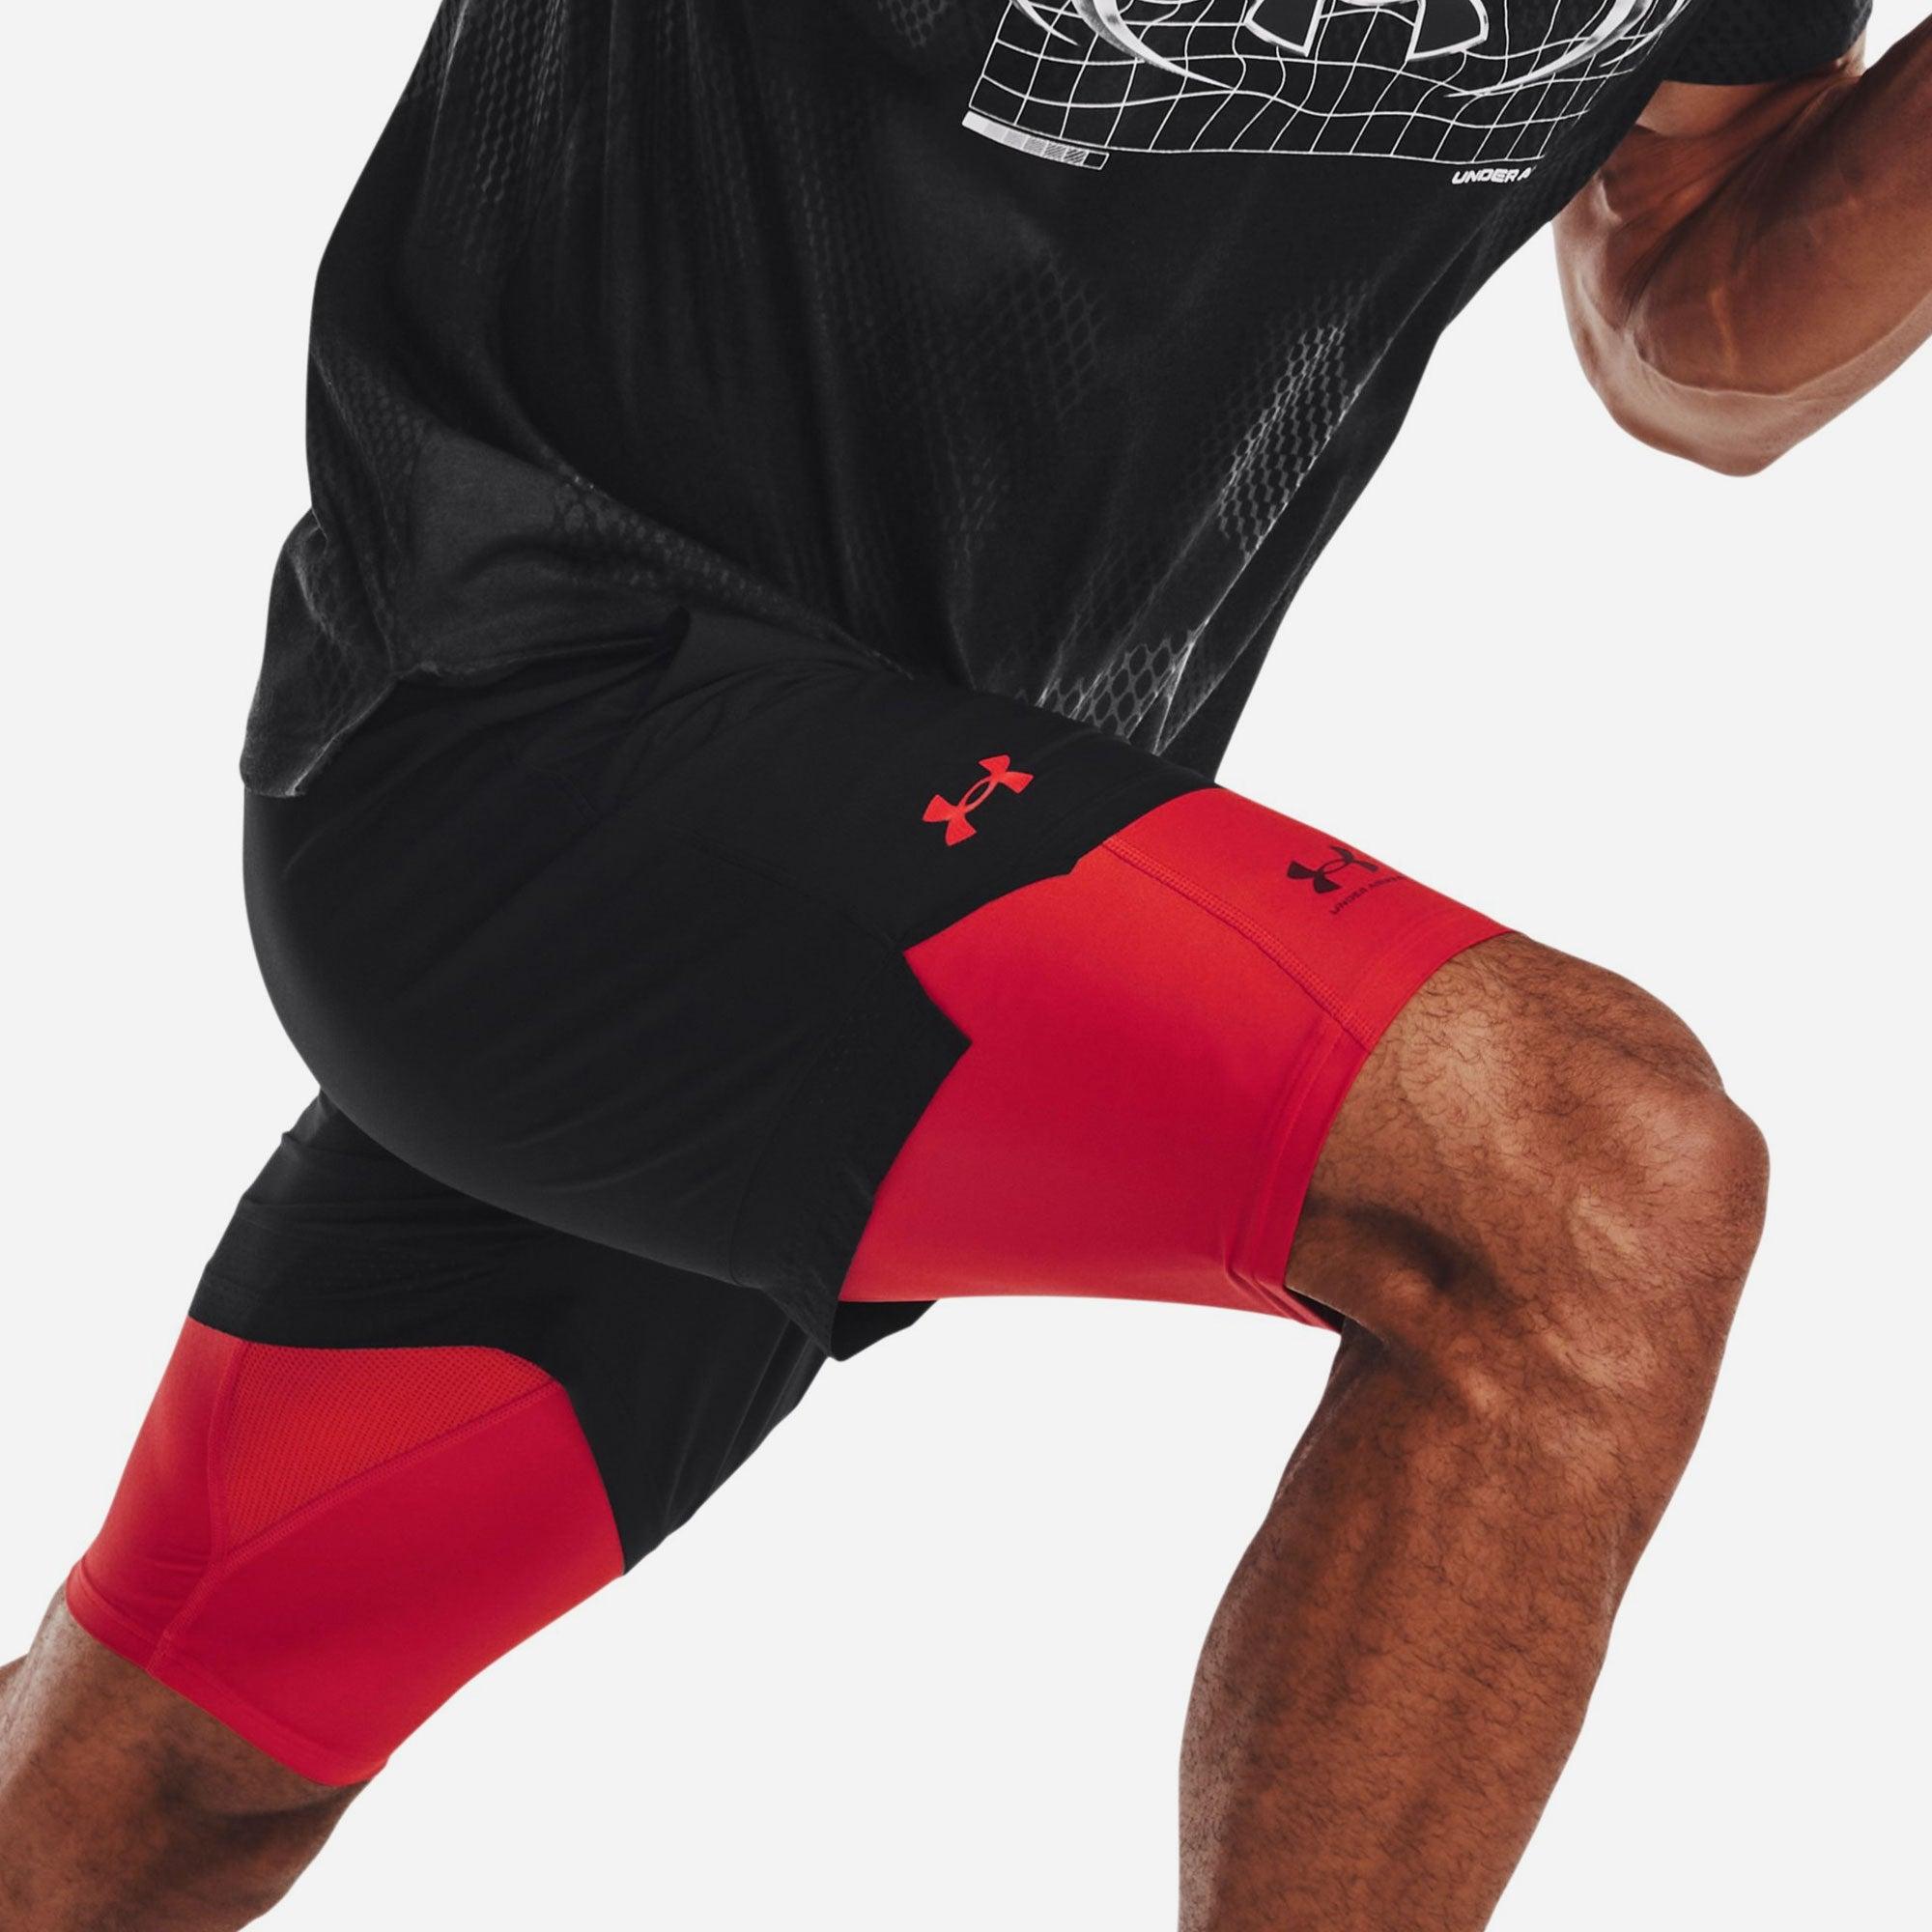 Quần ngắn thể thao nam Under Armour Isochill - 1365224-890